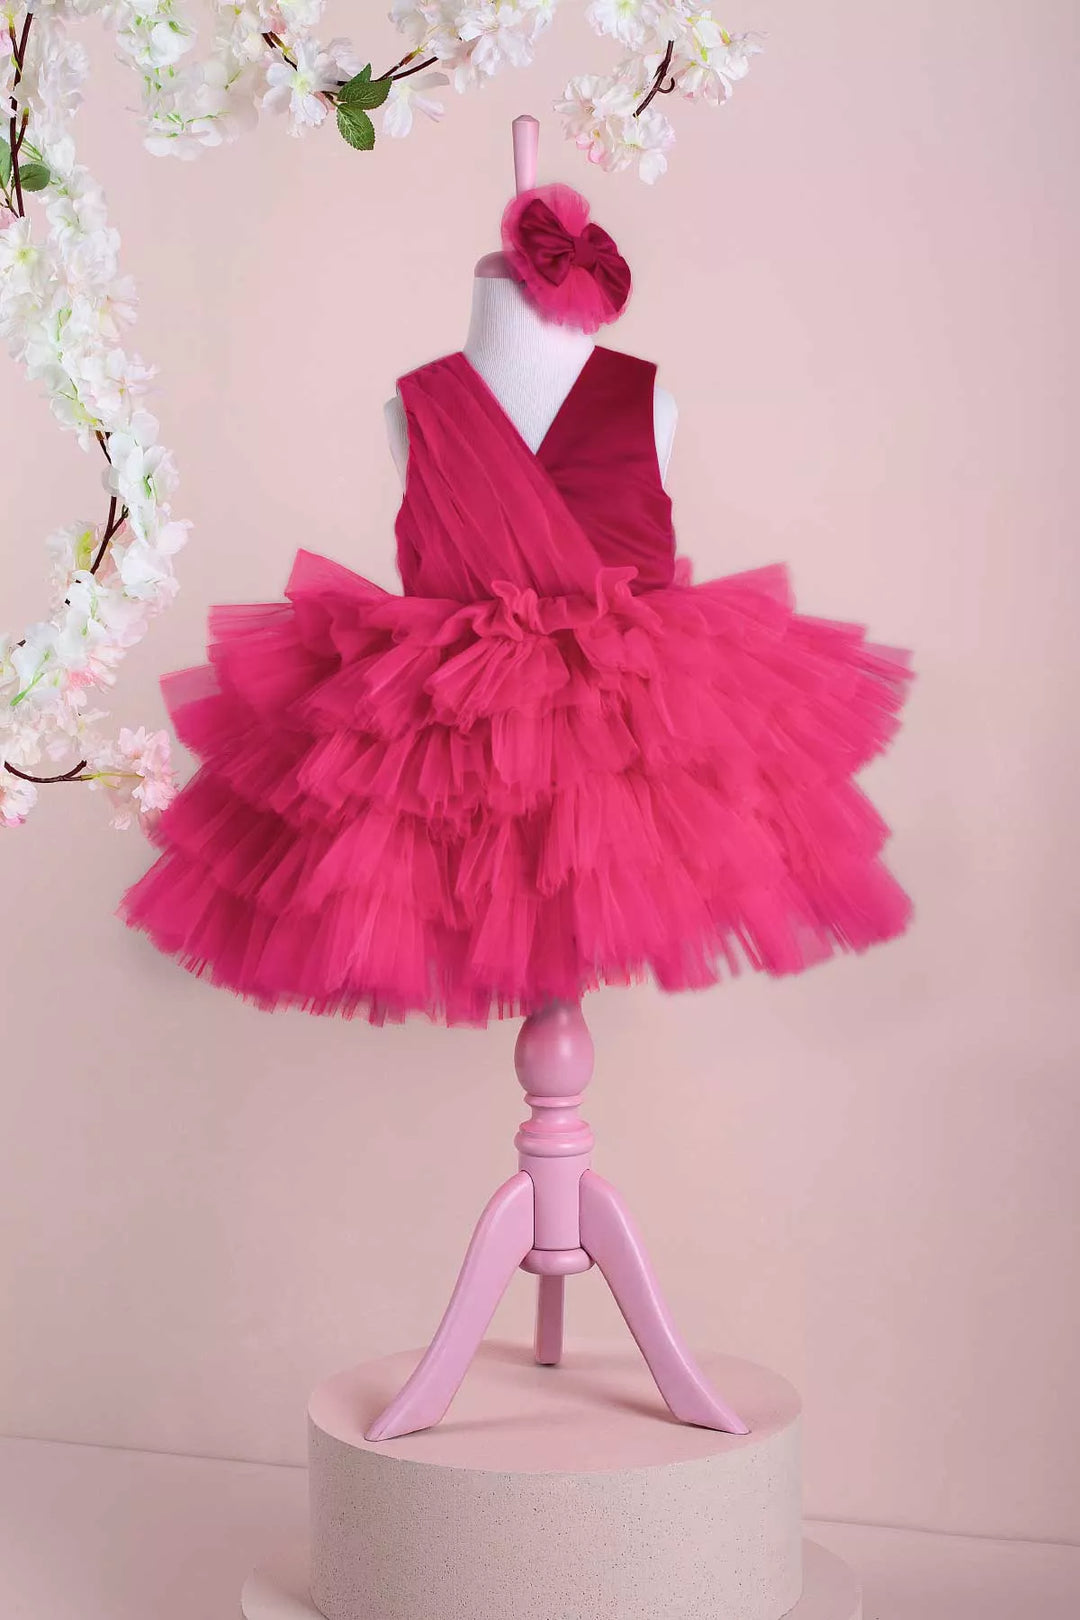 Pink fluffy party dress